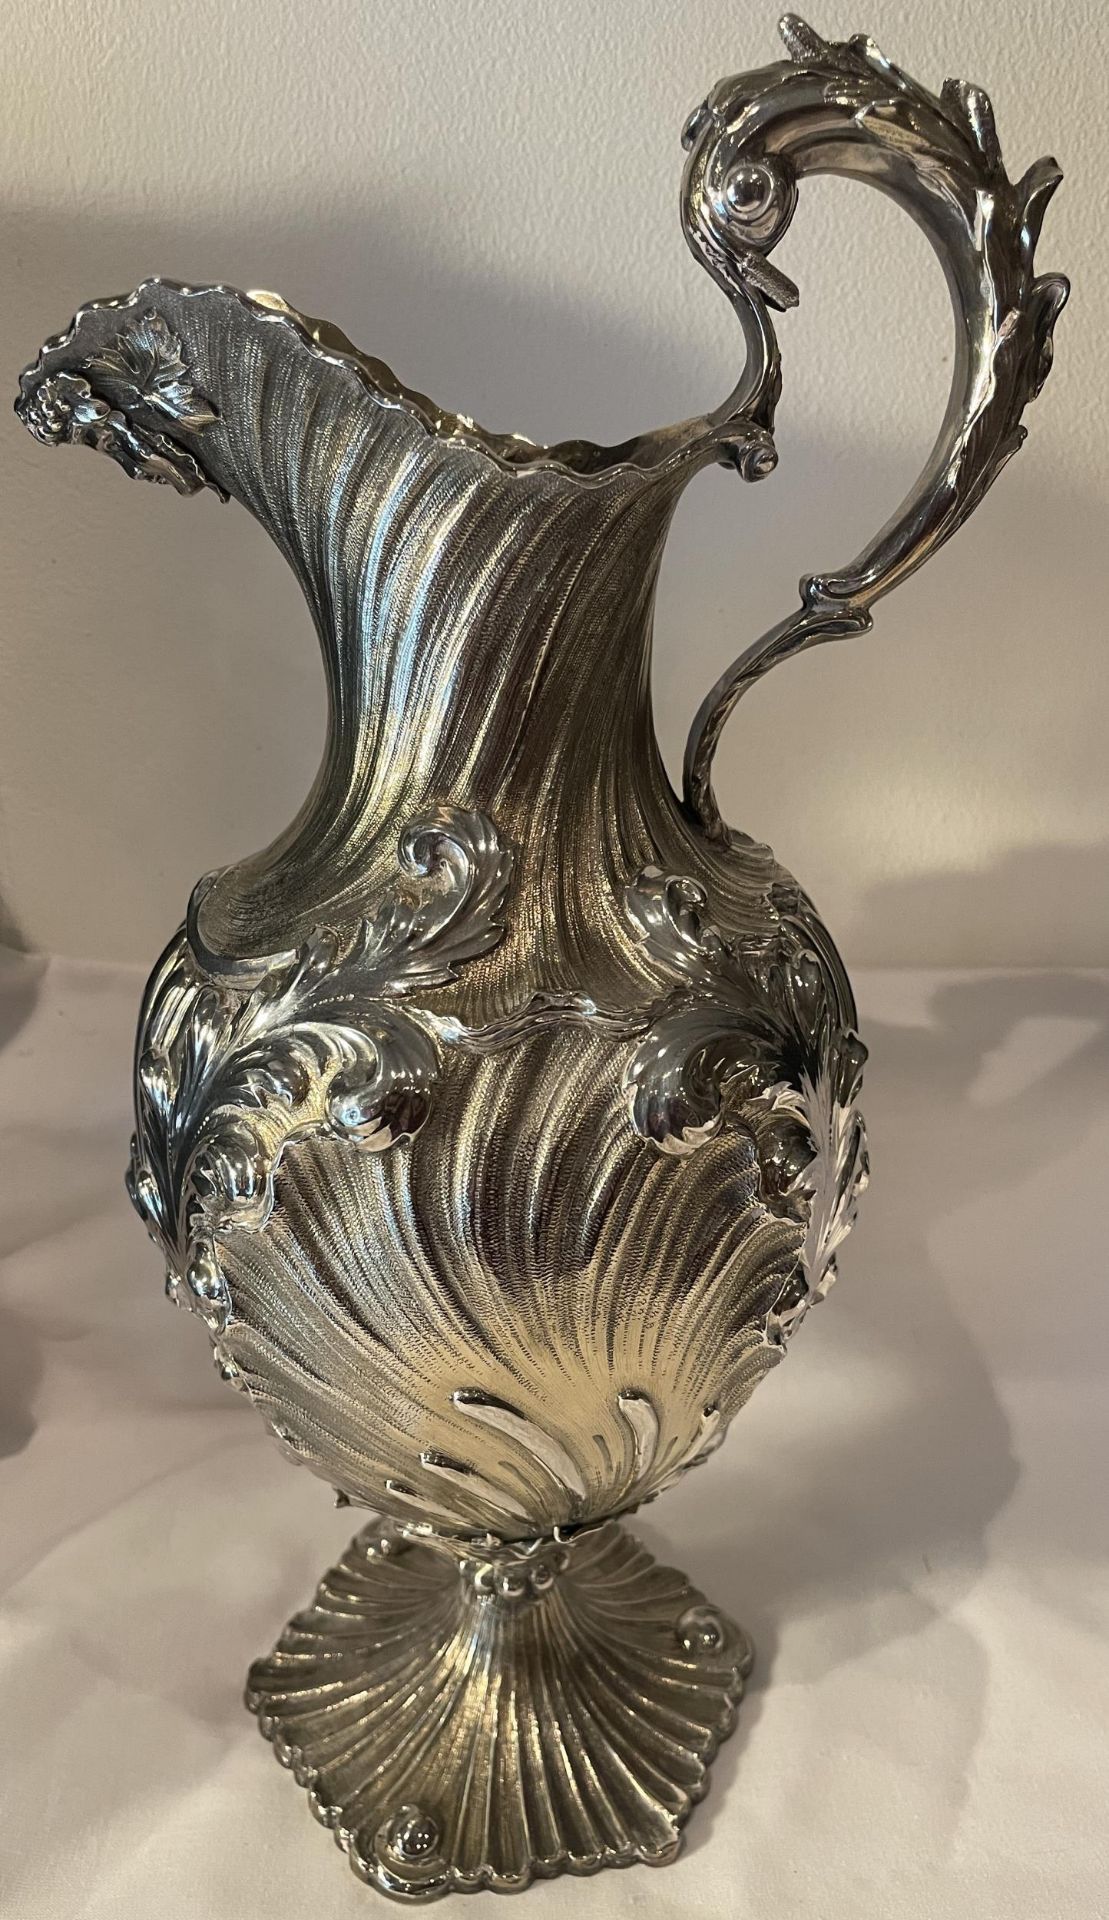 AN ORNATE 1830 HALLMARKED LONDON SILVER CLARET JUG, MAKER CHARLES FOX II GROSS WEIGHT 878 GRAMS - Image 3 of 18